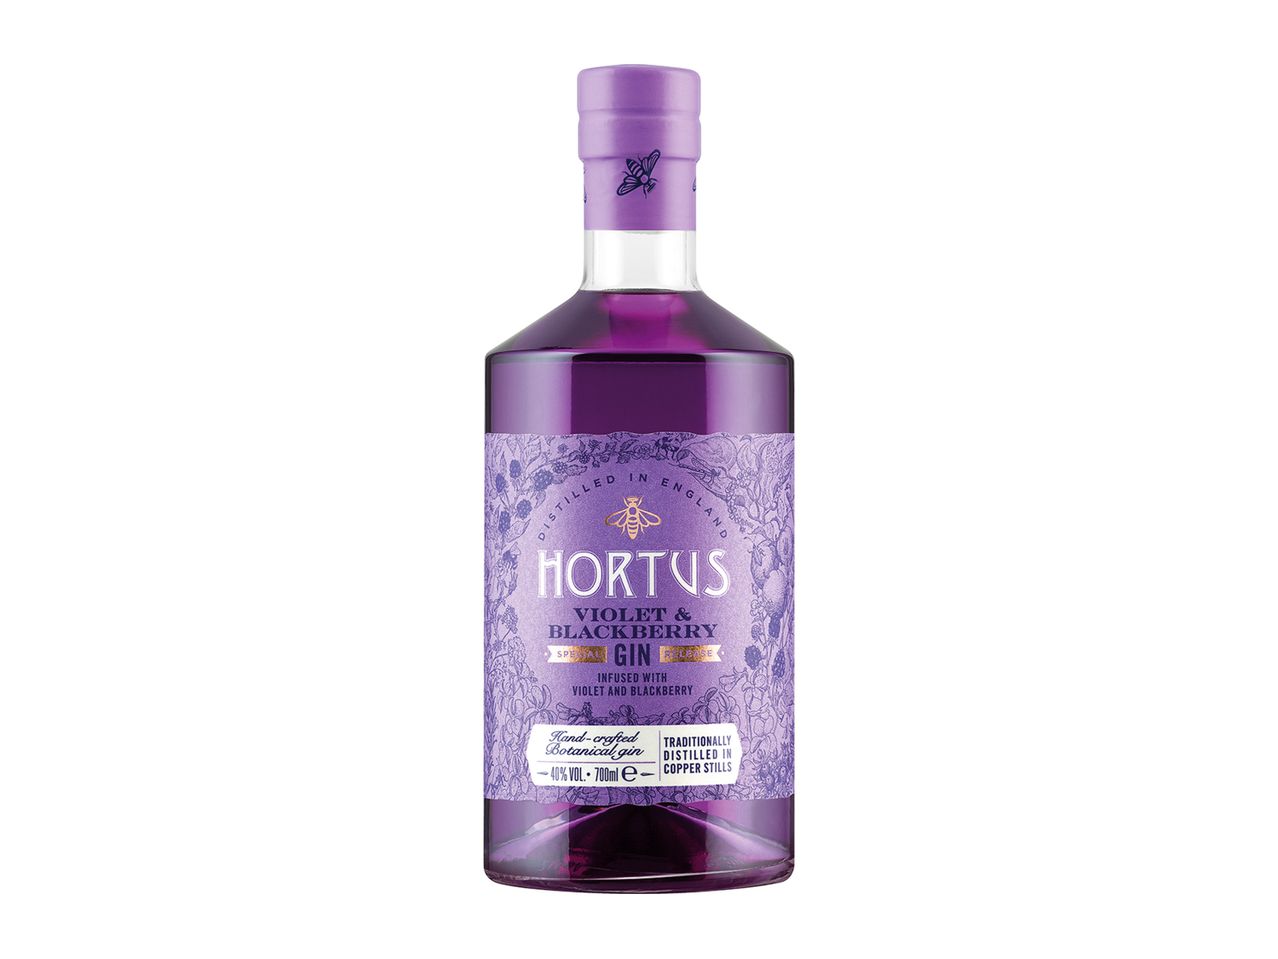 Go to full screen view: Hortus Violet & Blackberry Gin - Image 1